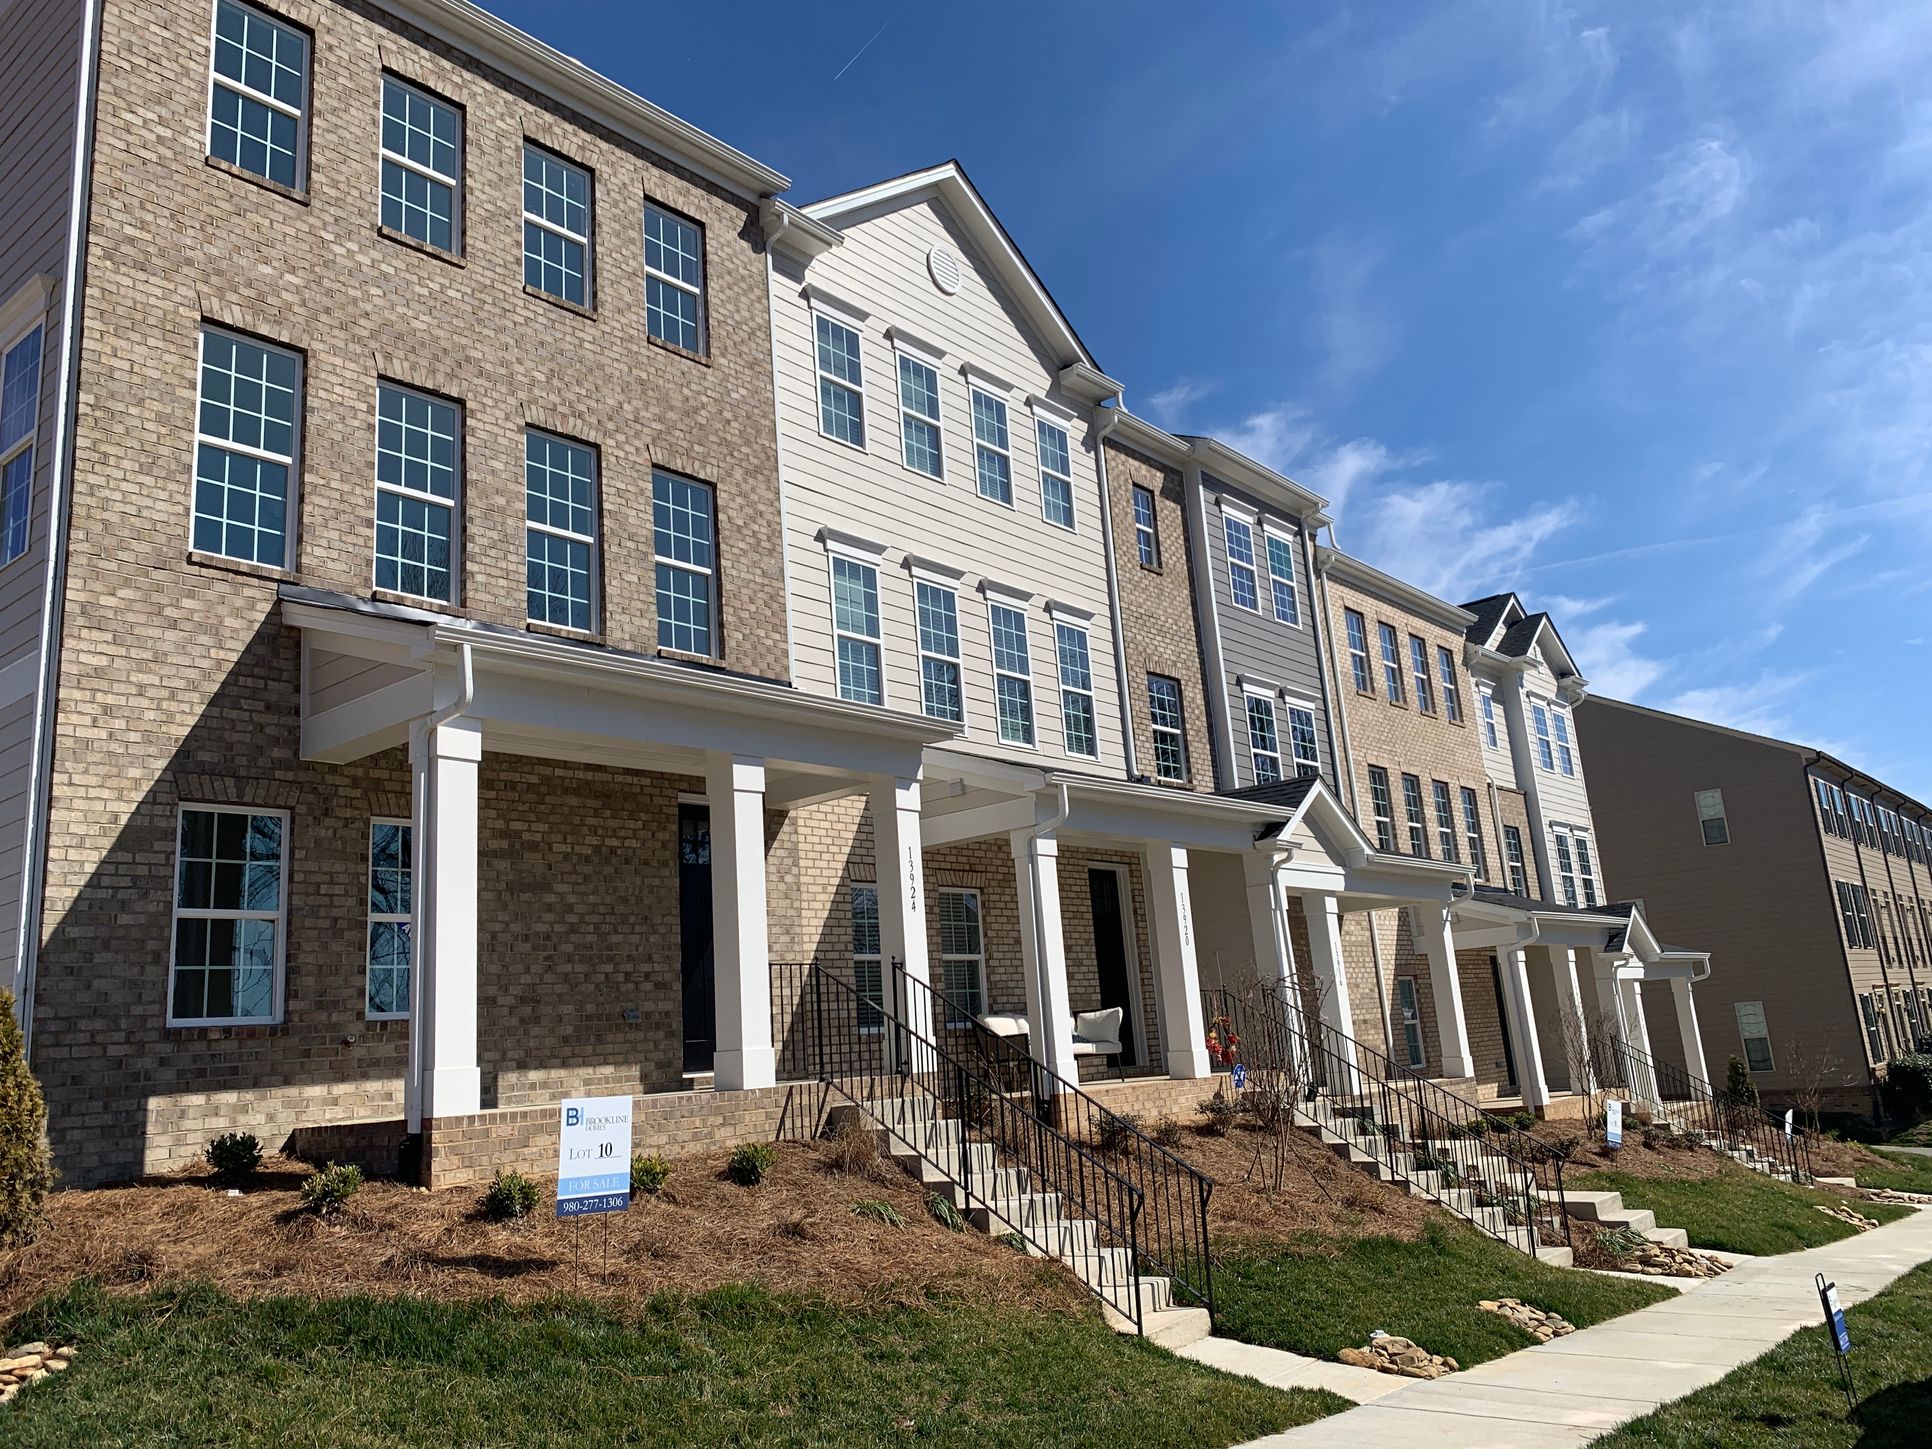 Vermillion Hill Street Townhomes:These fabulous townhomes feature ample smart-living space including a lower-level flex space perfect for an office or entertainment room.